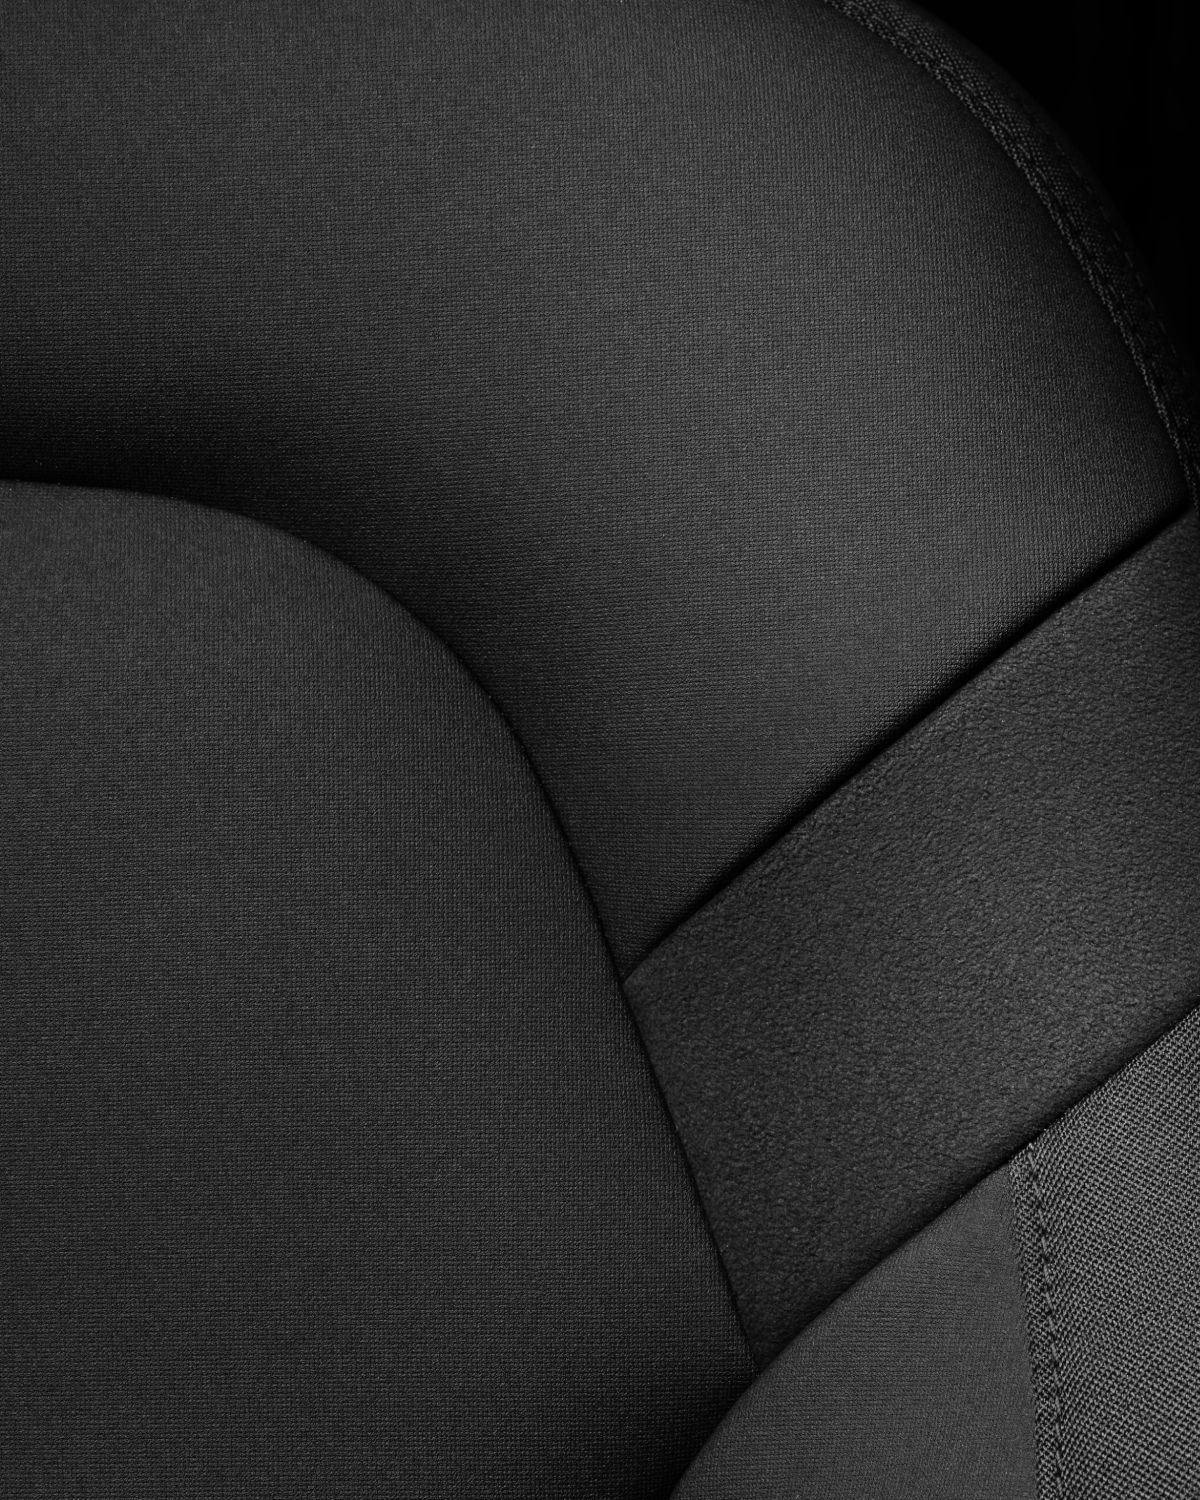 Close-up on a dark vegan material for seats.